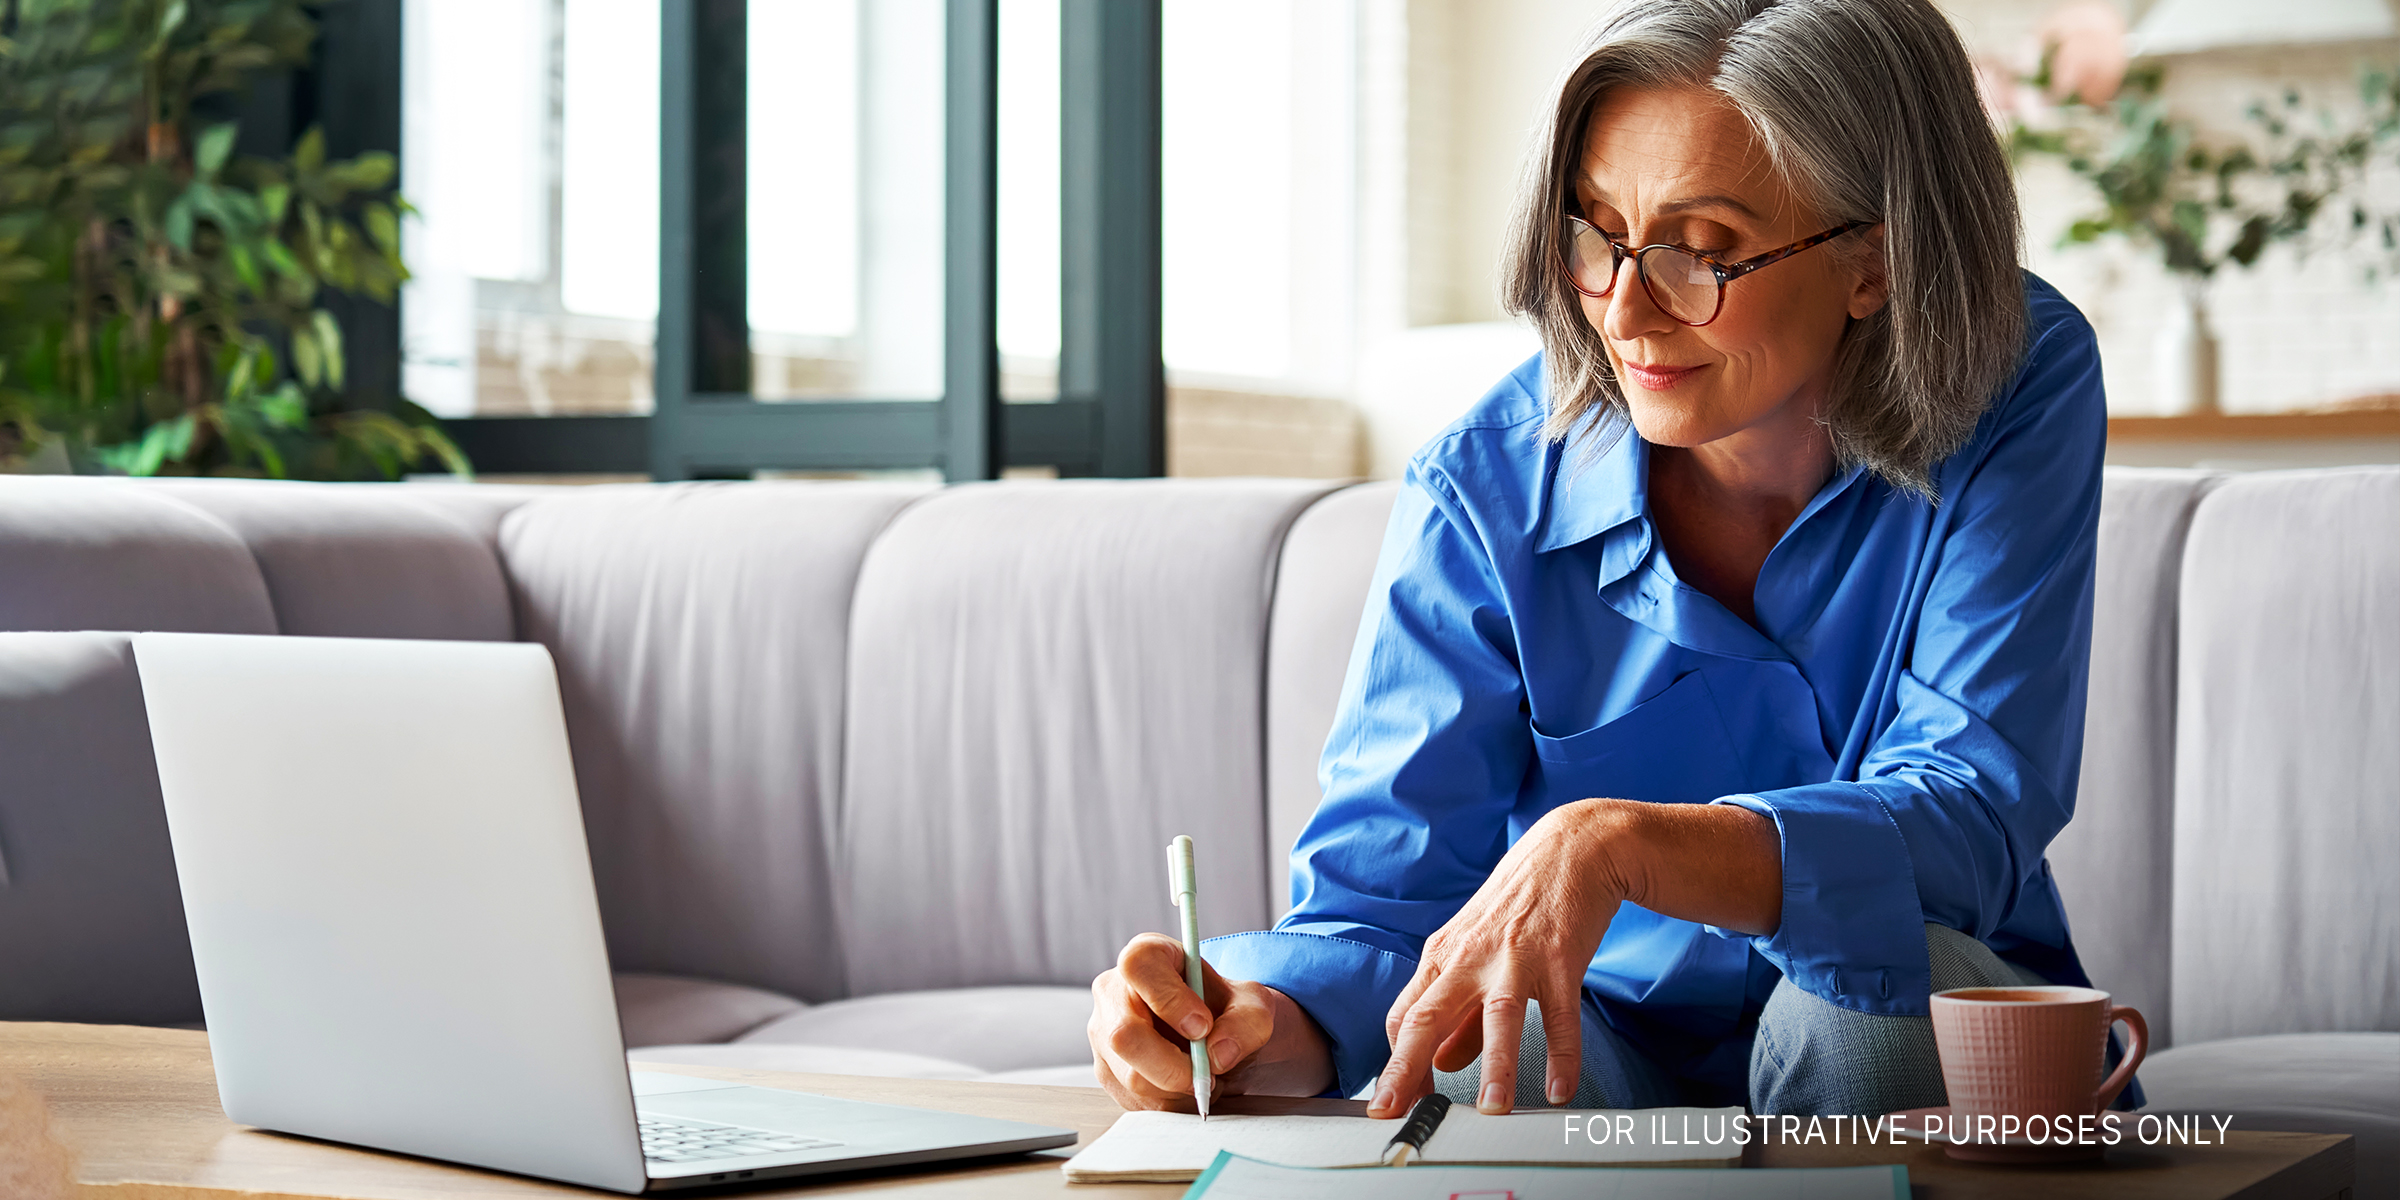 A senior lady taking notes while working on a laptop | Source: Shutterstock